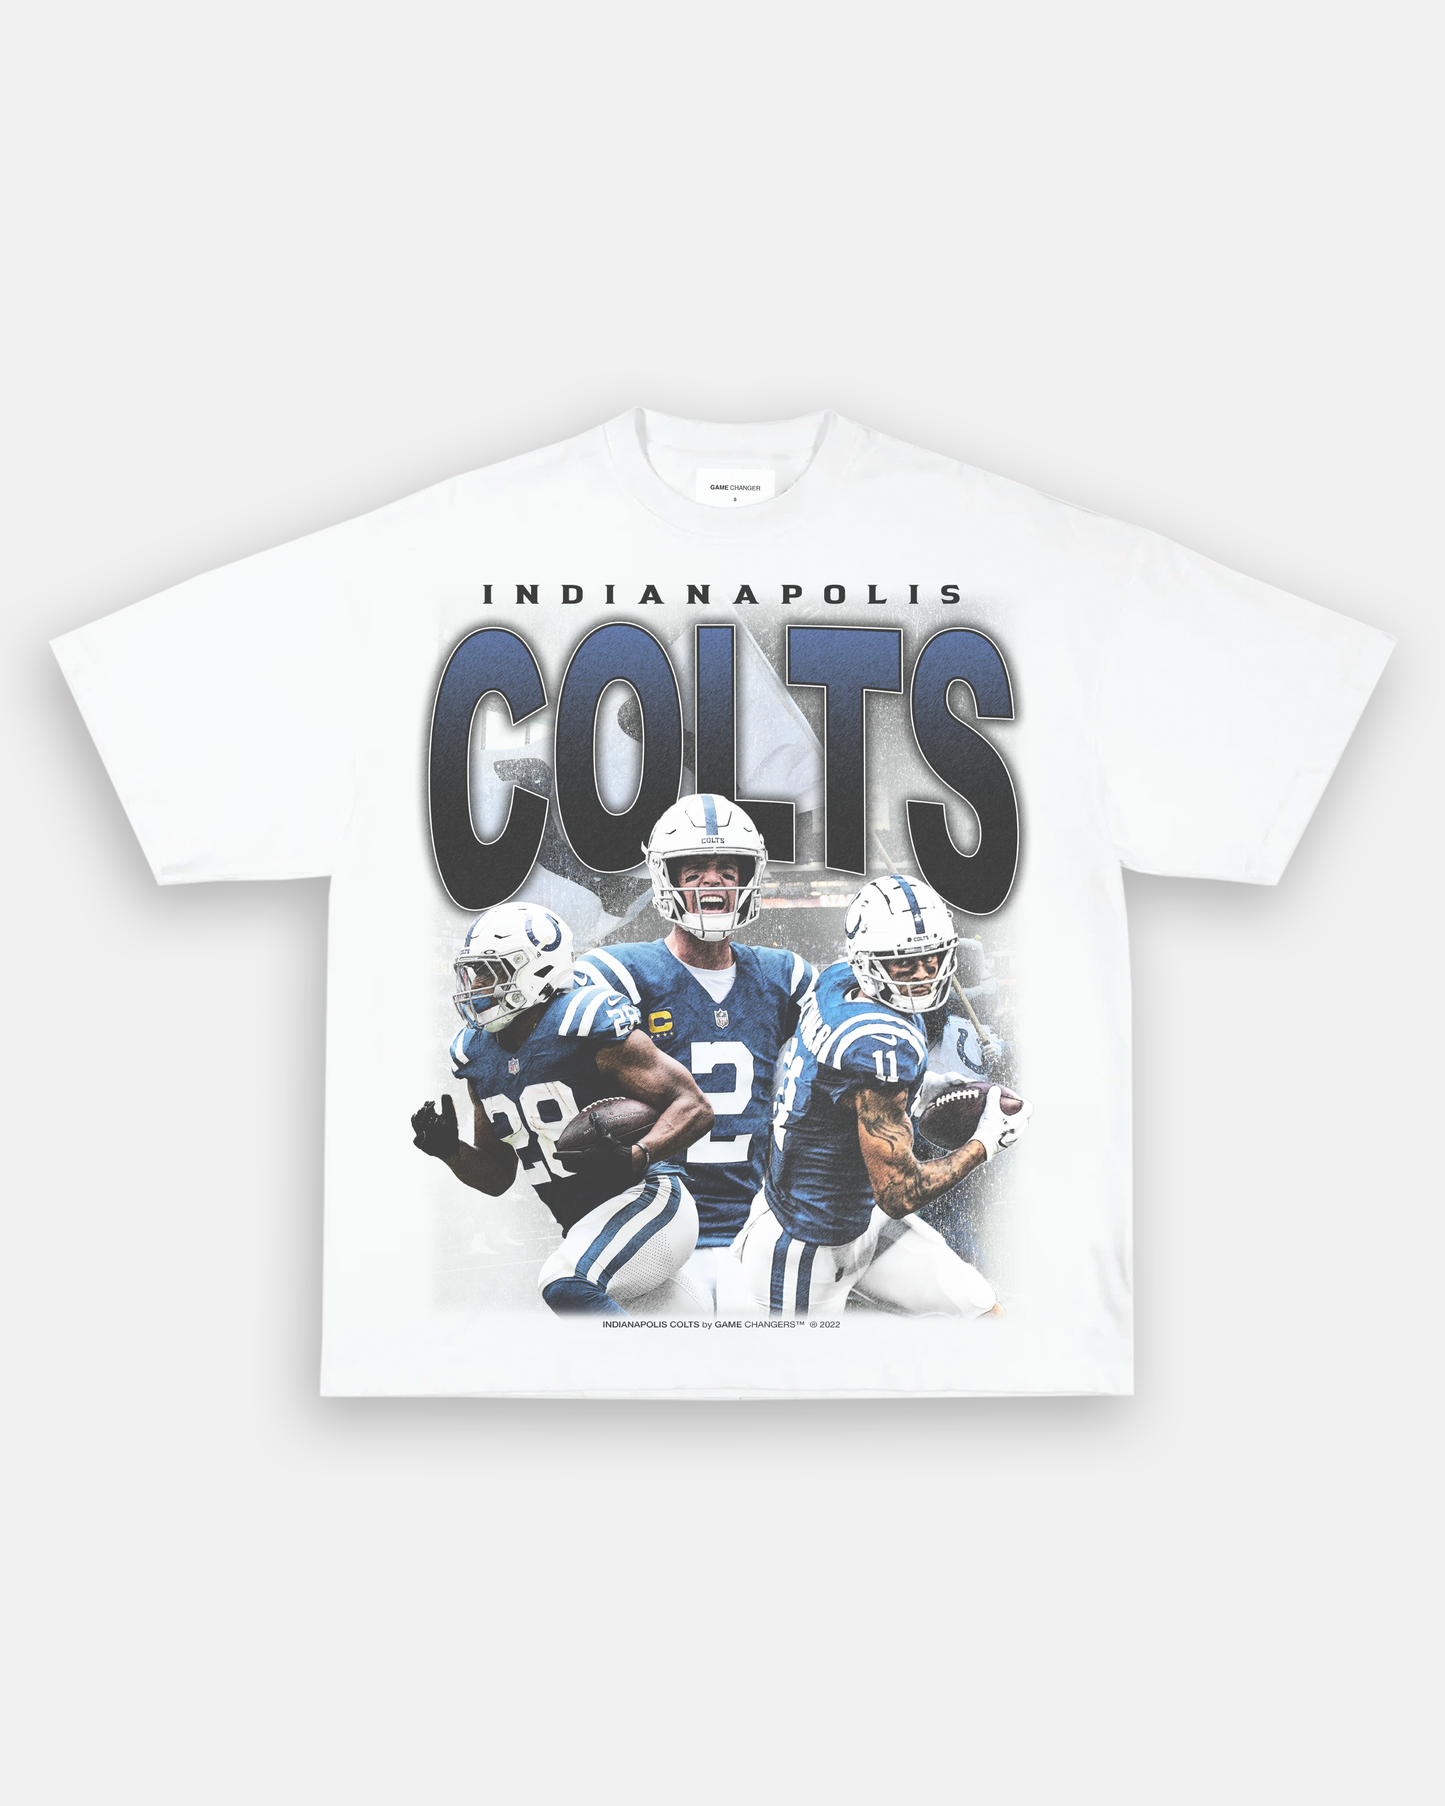 INDIANAPOLIS COLTS TEE